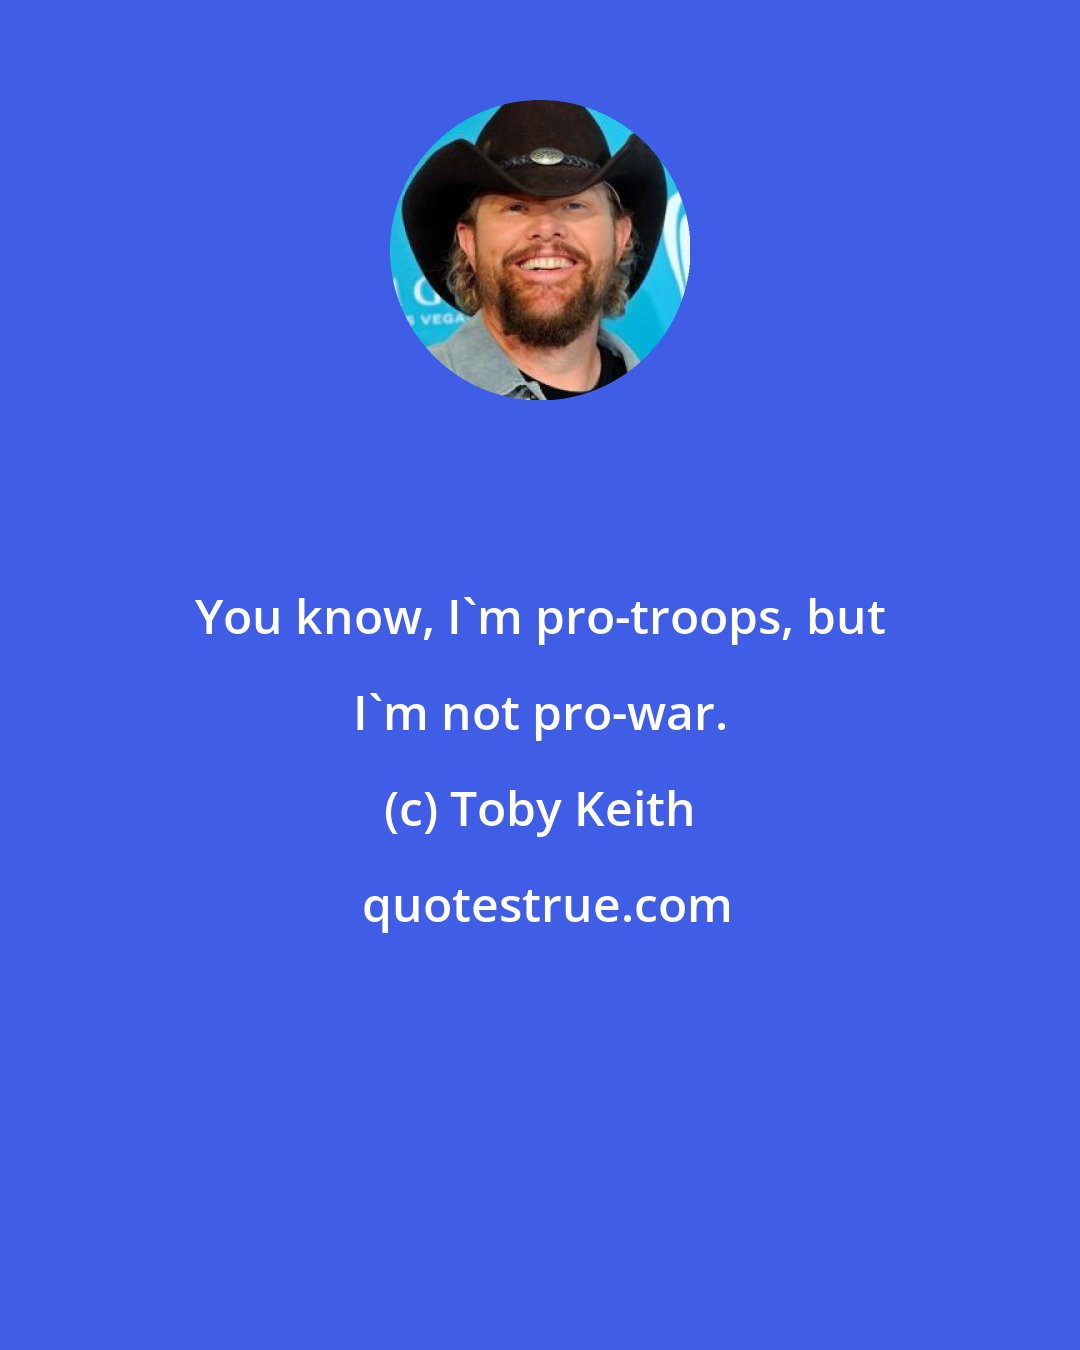 Toby Keith: You know, I'm pro-troops, but I'm not pro-war.